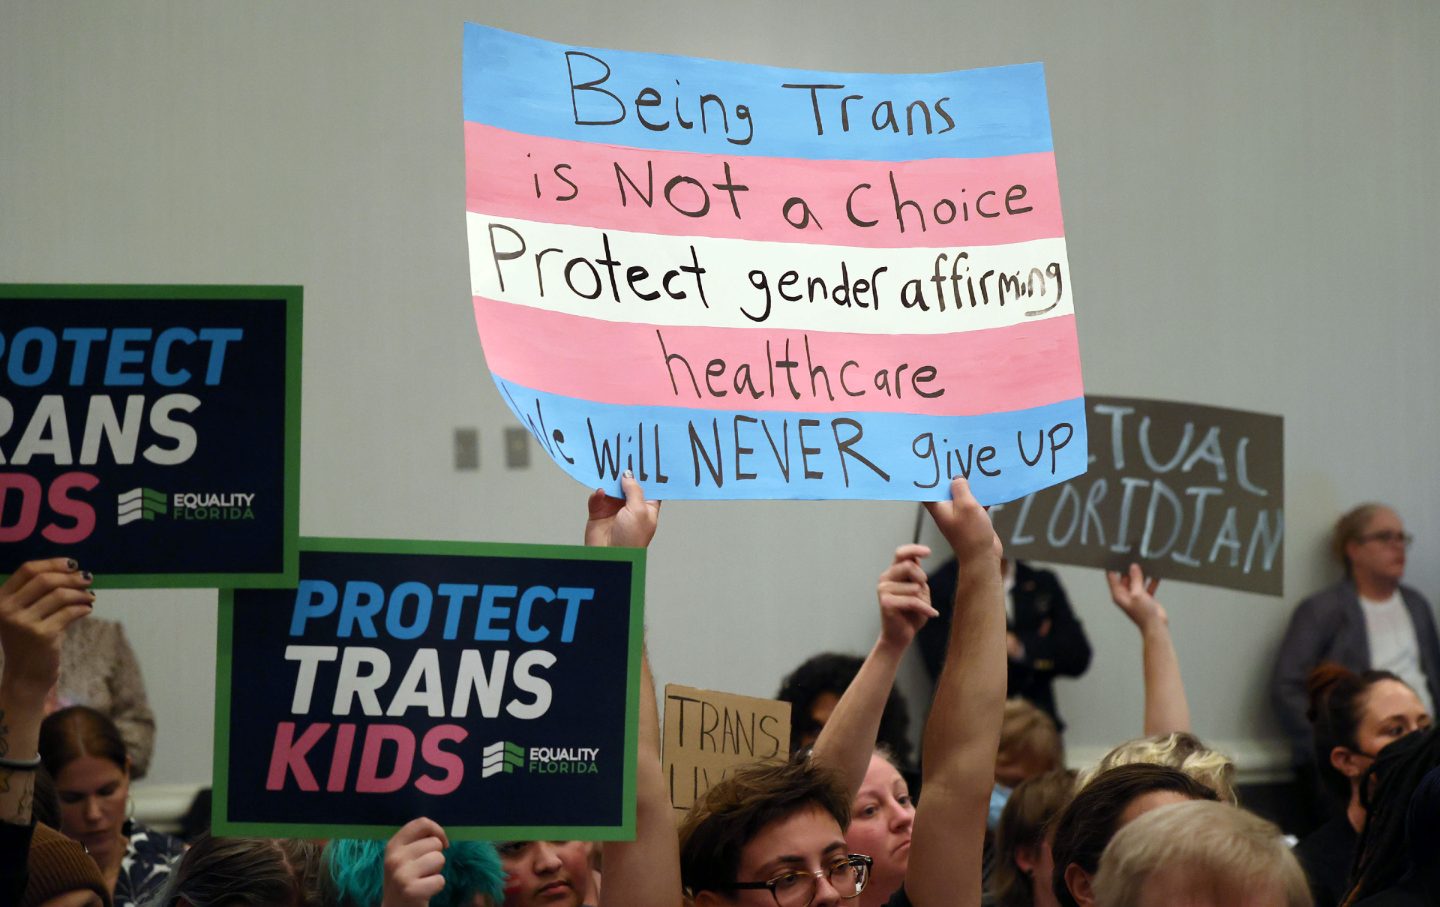 Protect Trans Kids! Join the Movement for Equality!